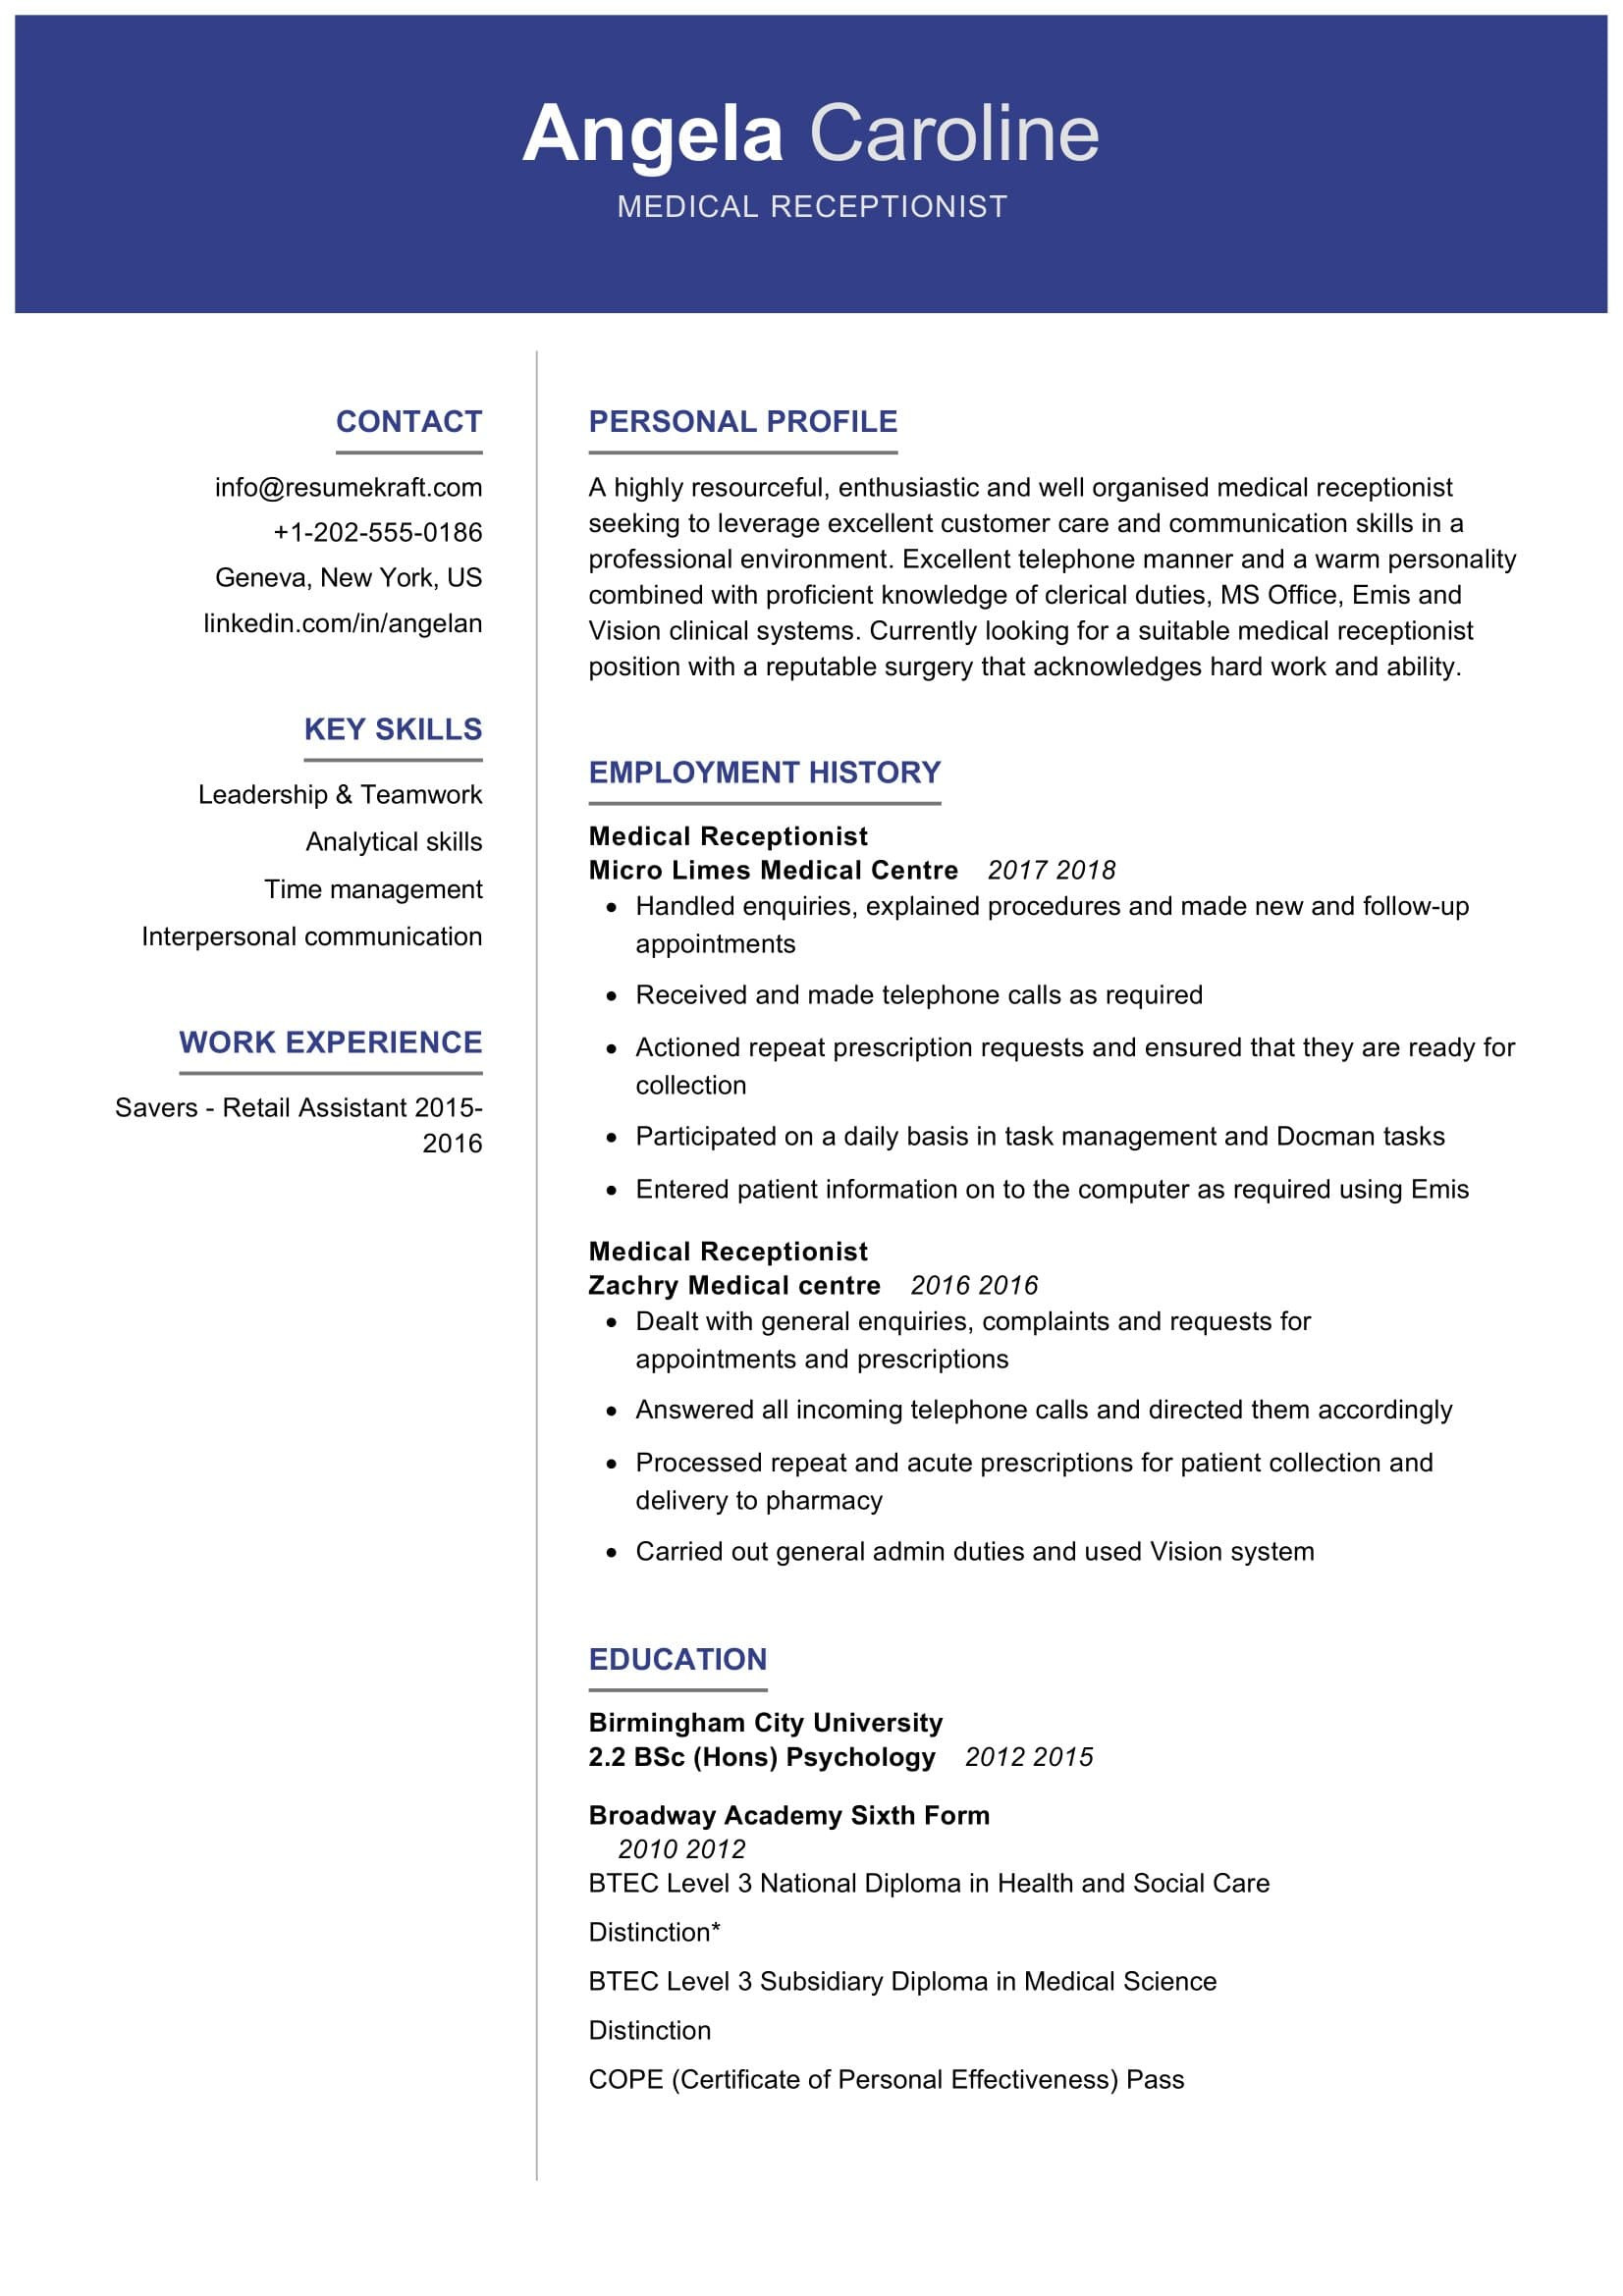 Sample Resume for Medical Receptionist with No Experience Medical Receptionist Resume Sample 2021 Writing Tips – Resumekraft